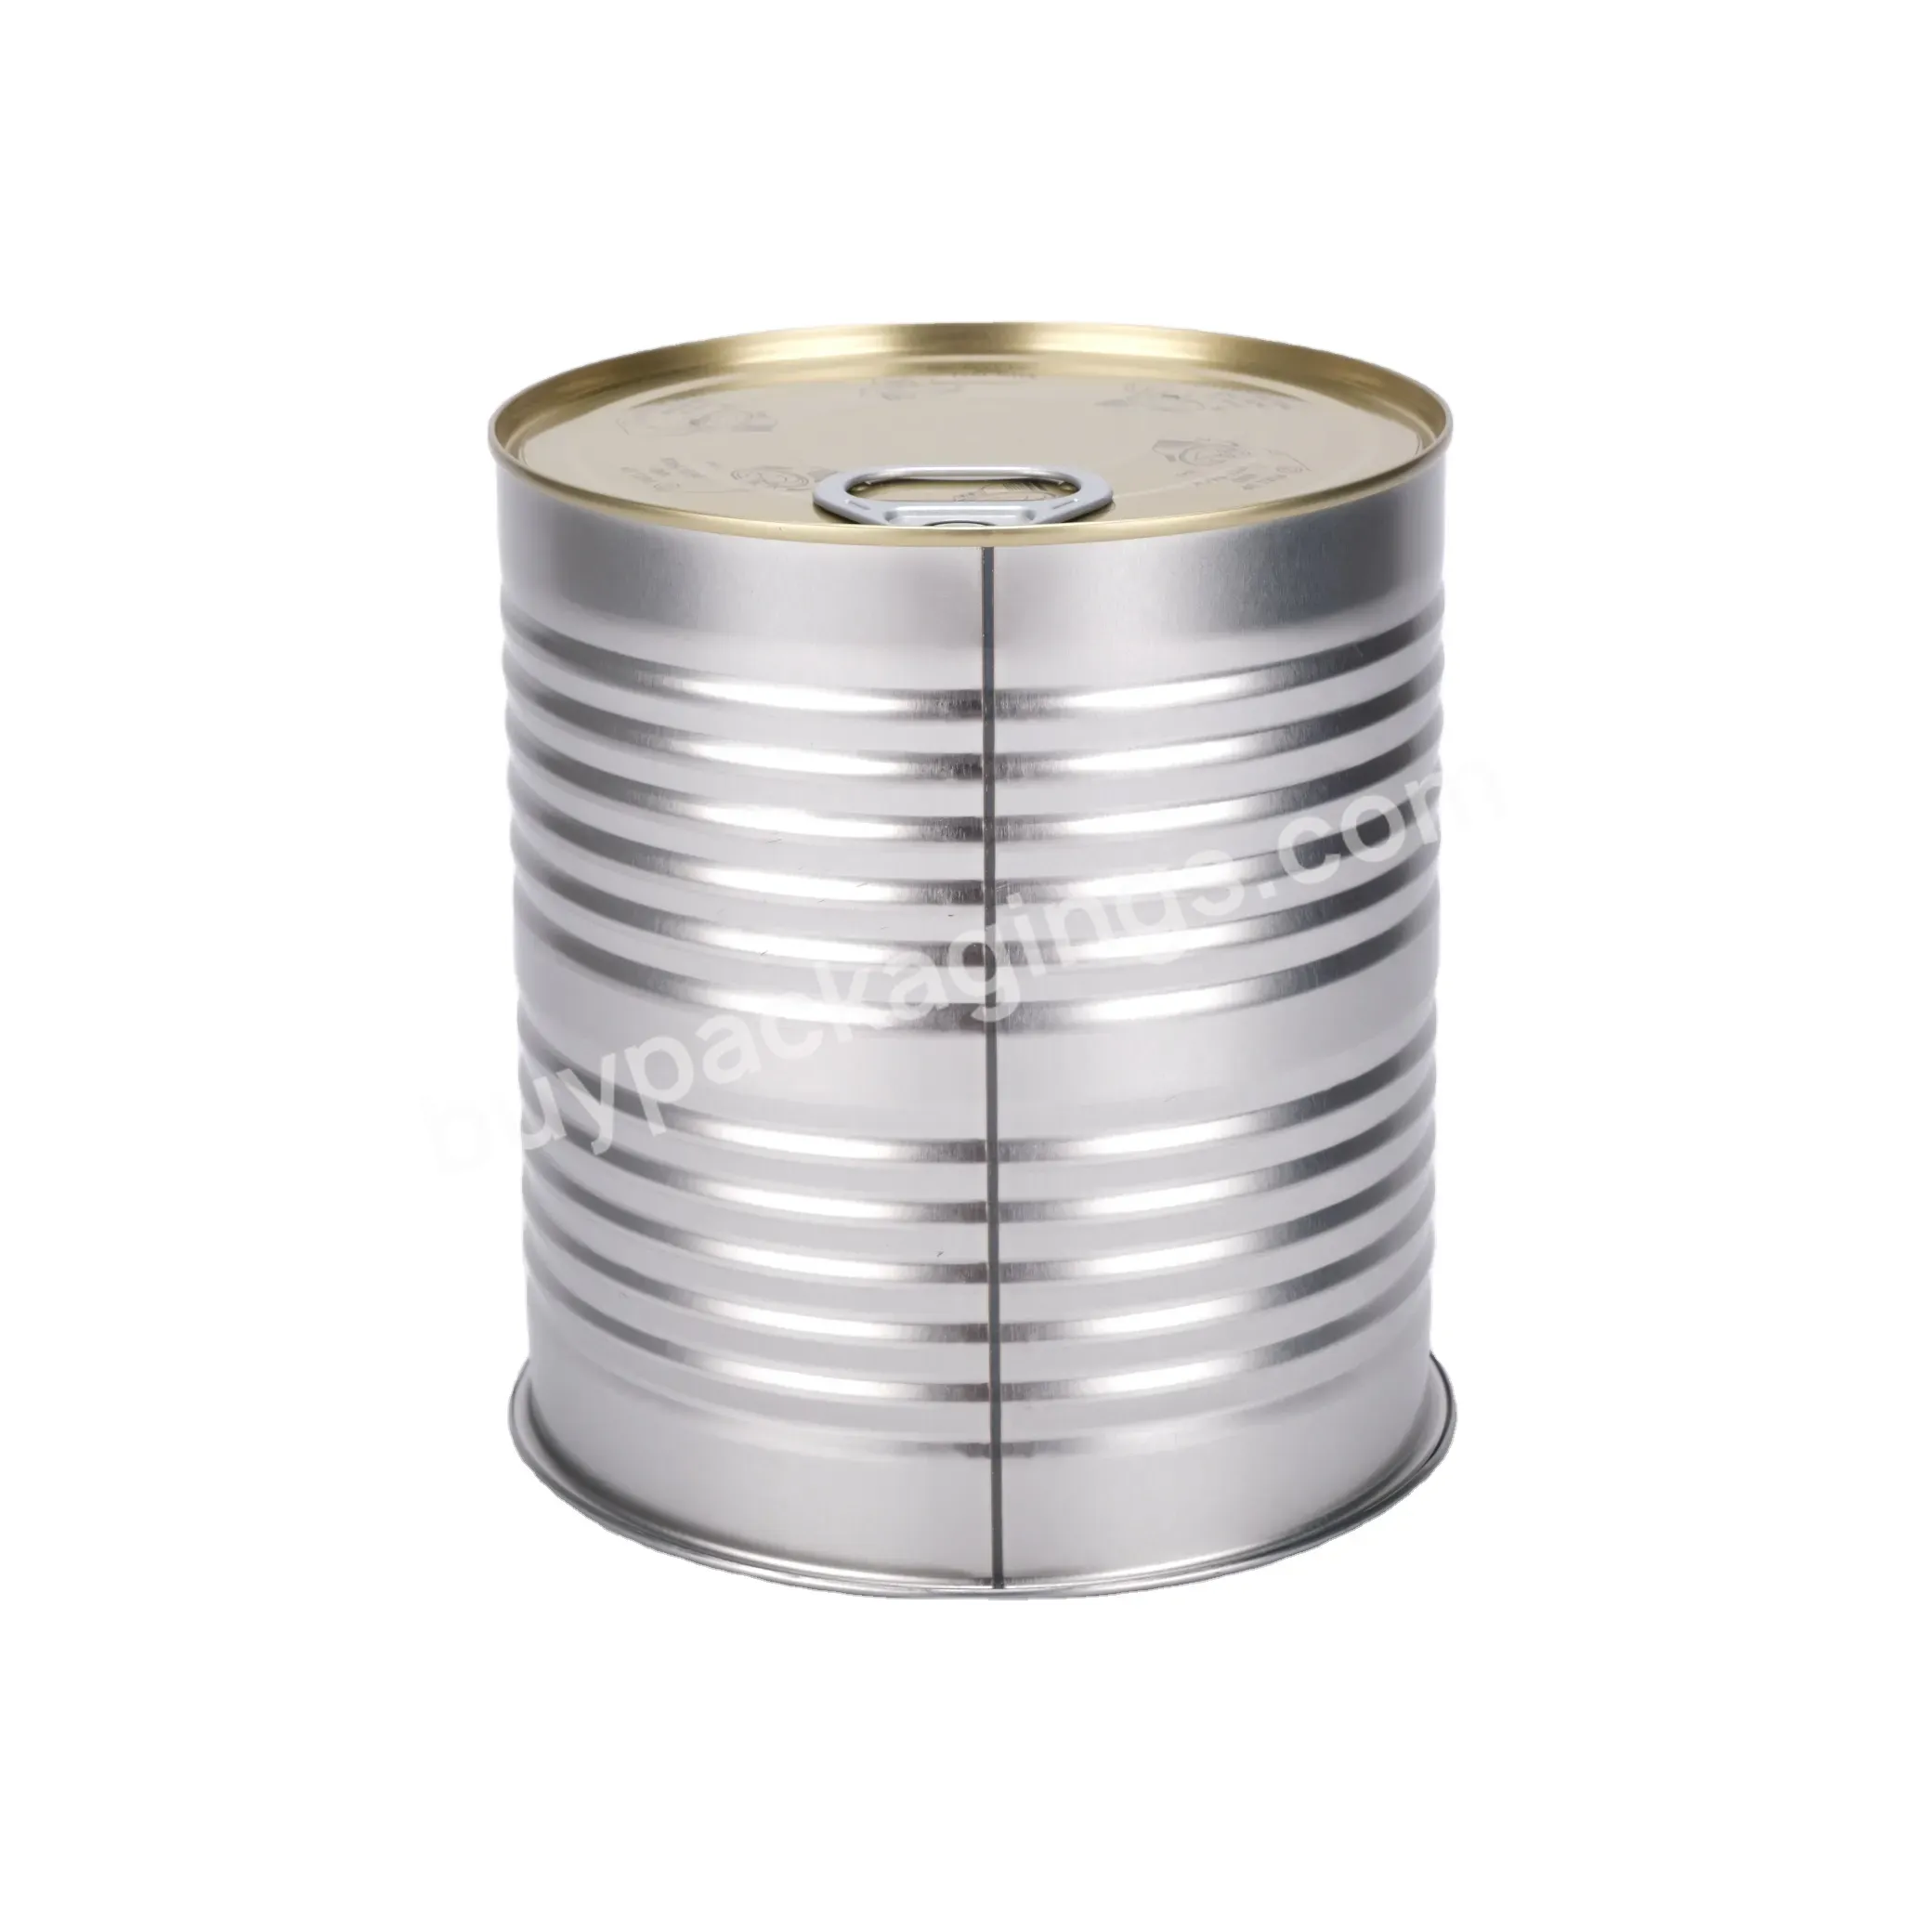 Affordable Very Practical Boutique Fashion Empty Metal Aluminum Food Tin Cans